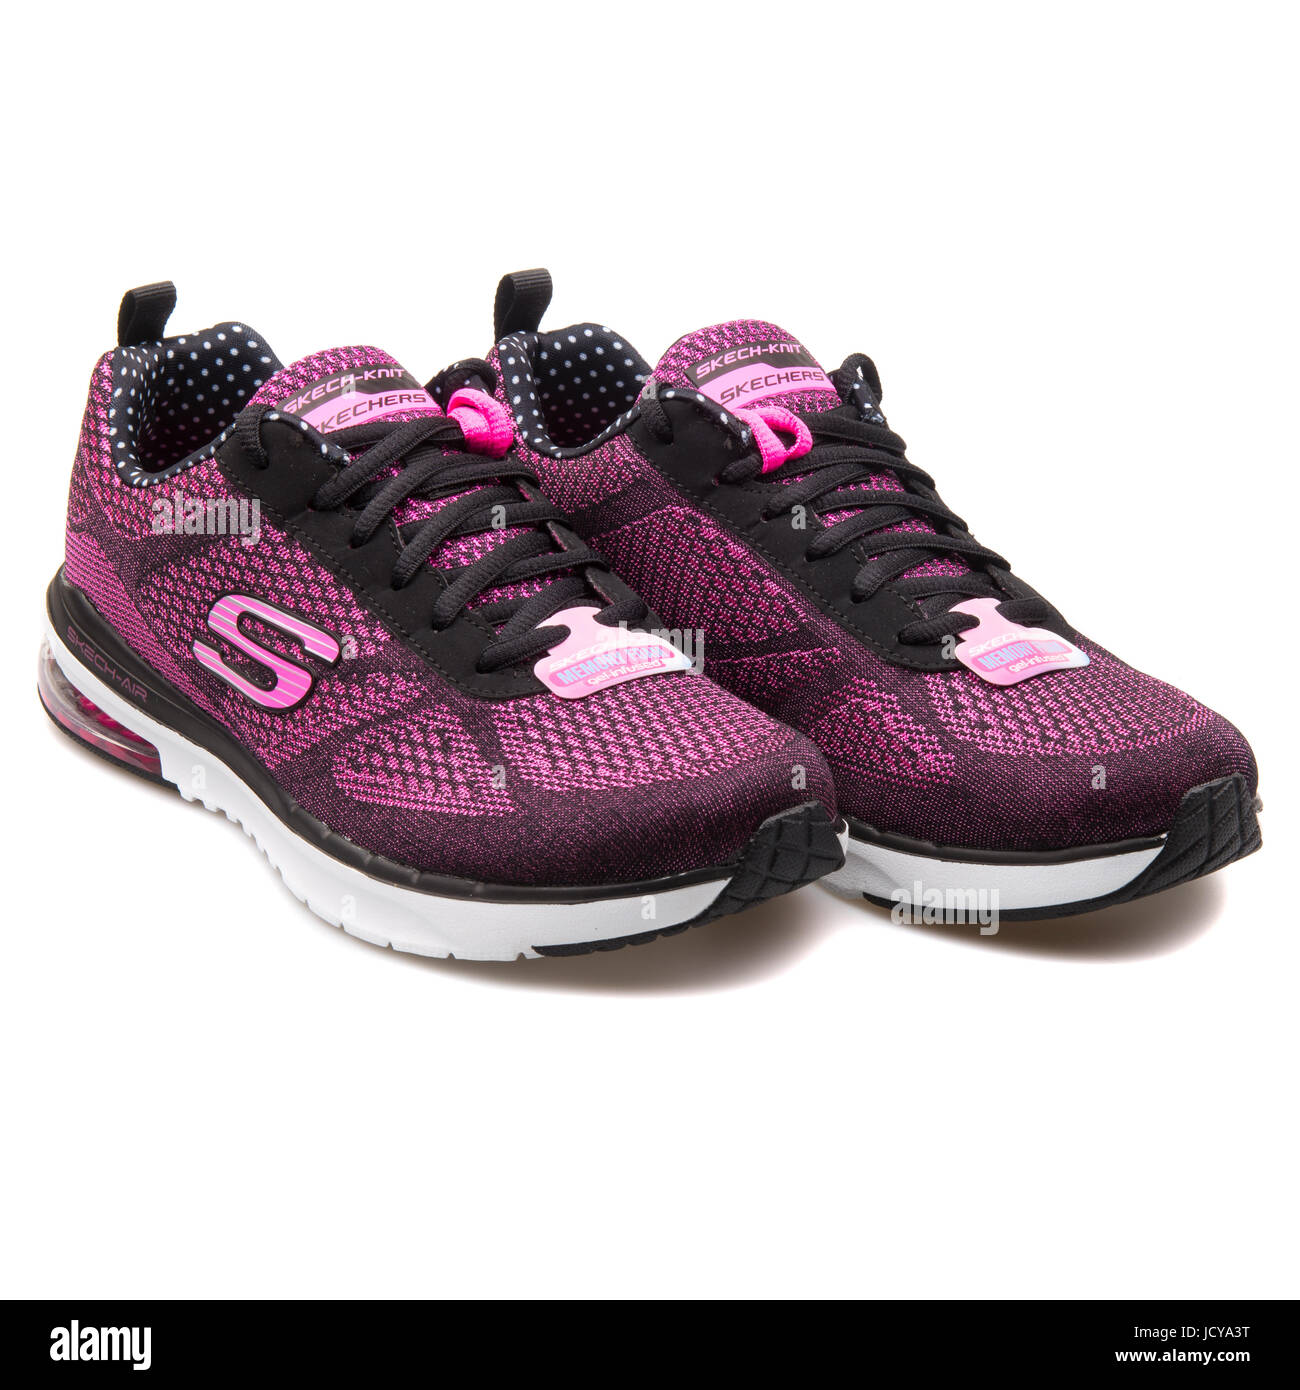 Skechers Skech-Air Infinity Black and Hot Pink Women's Running Shoes -  12111-BKHP Stock Photo - Alamy